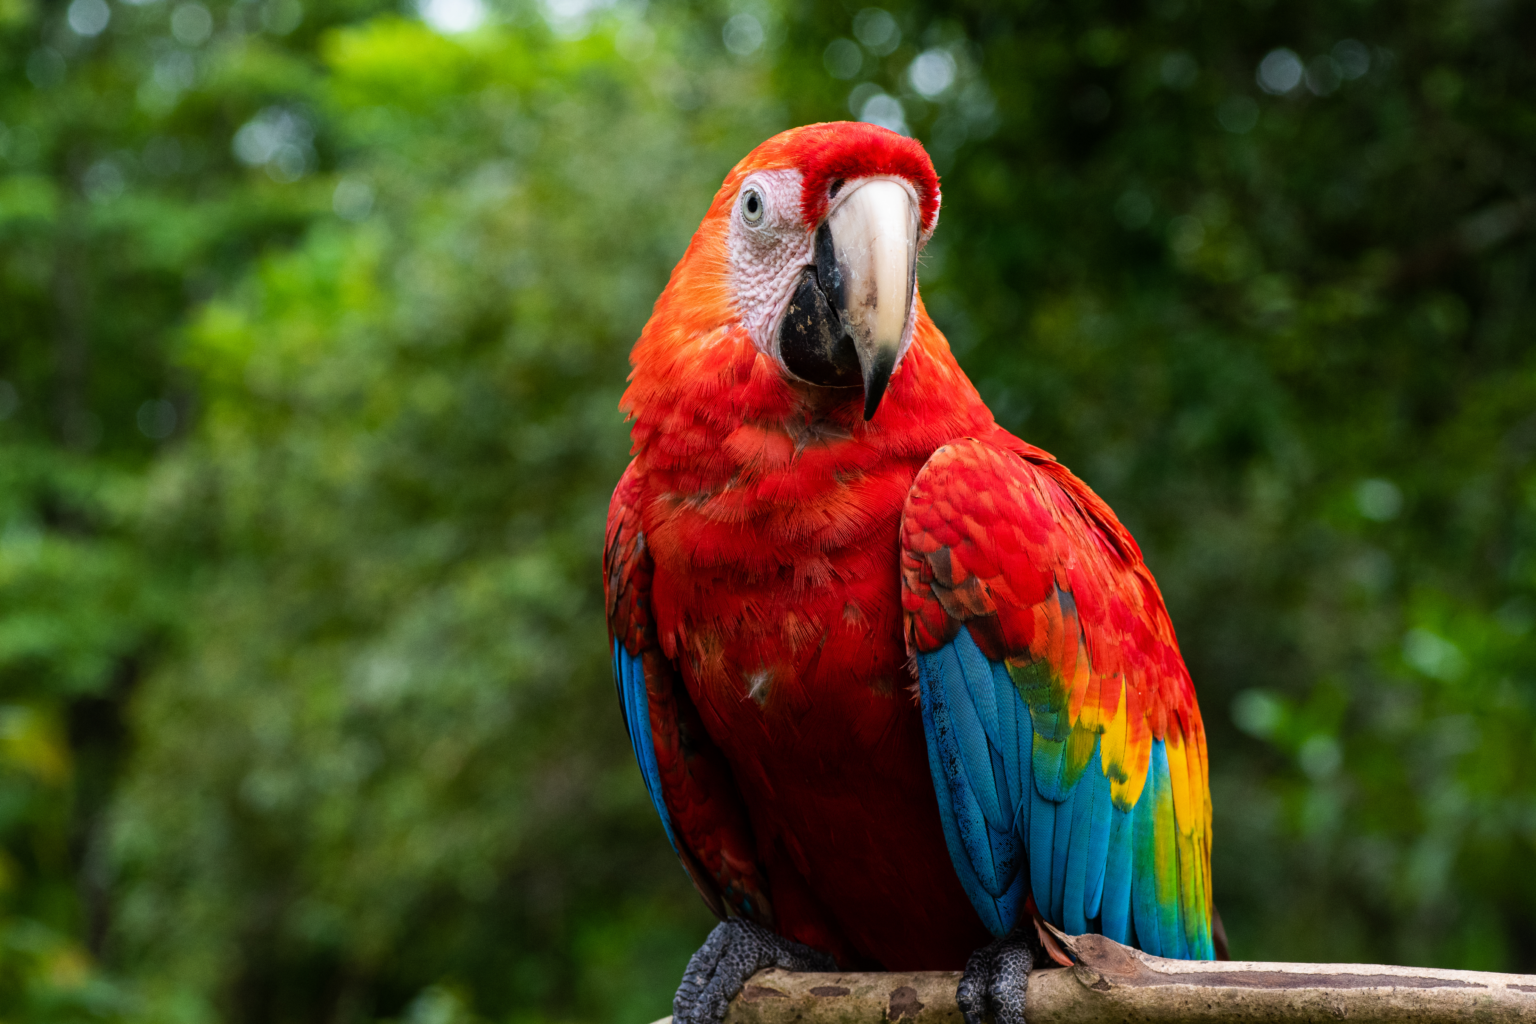 Red blue and yellow parrot in front of green jungle